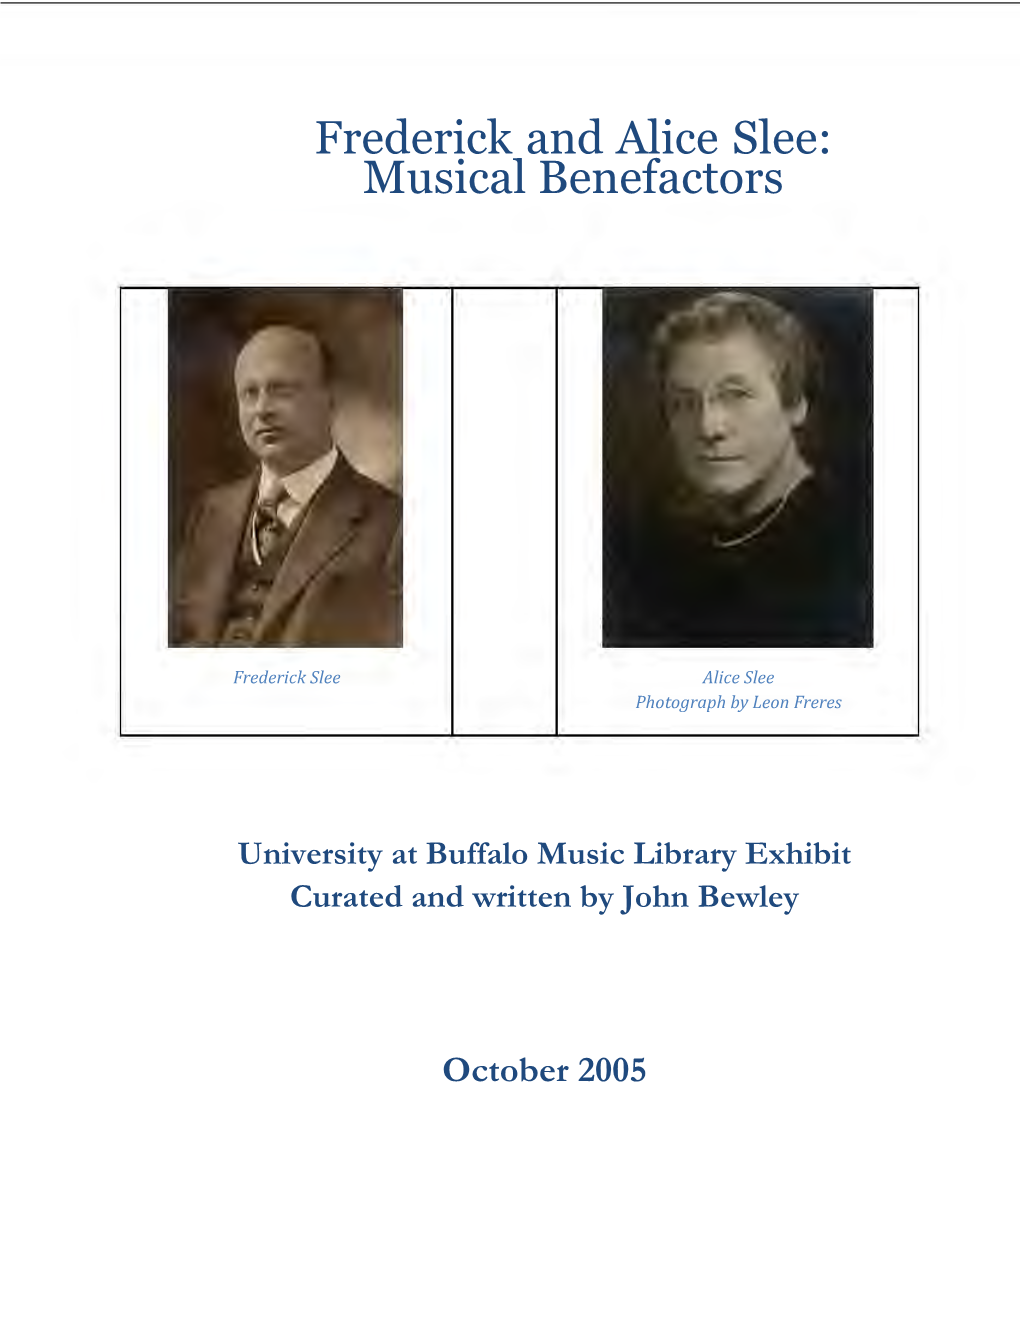 Frederick and Alice Slee: Musical Benefactors